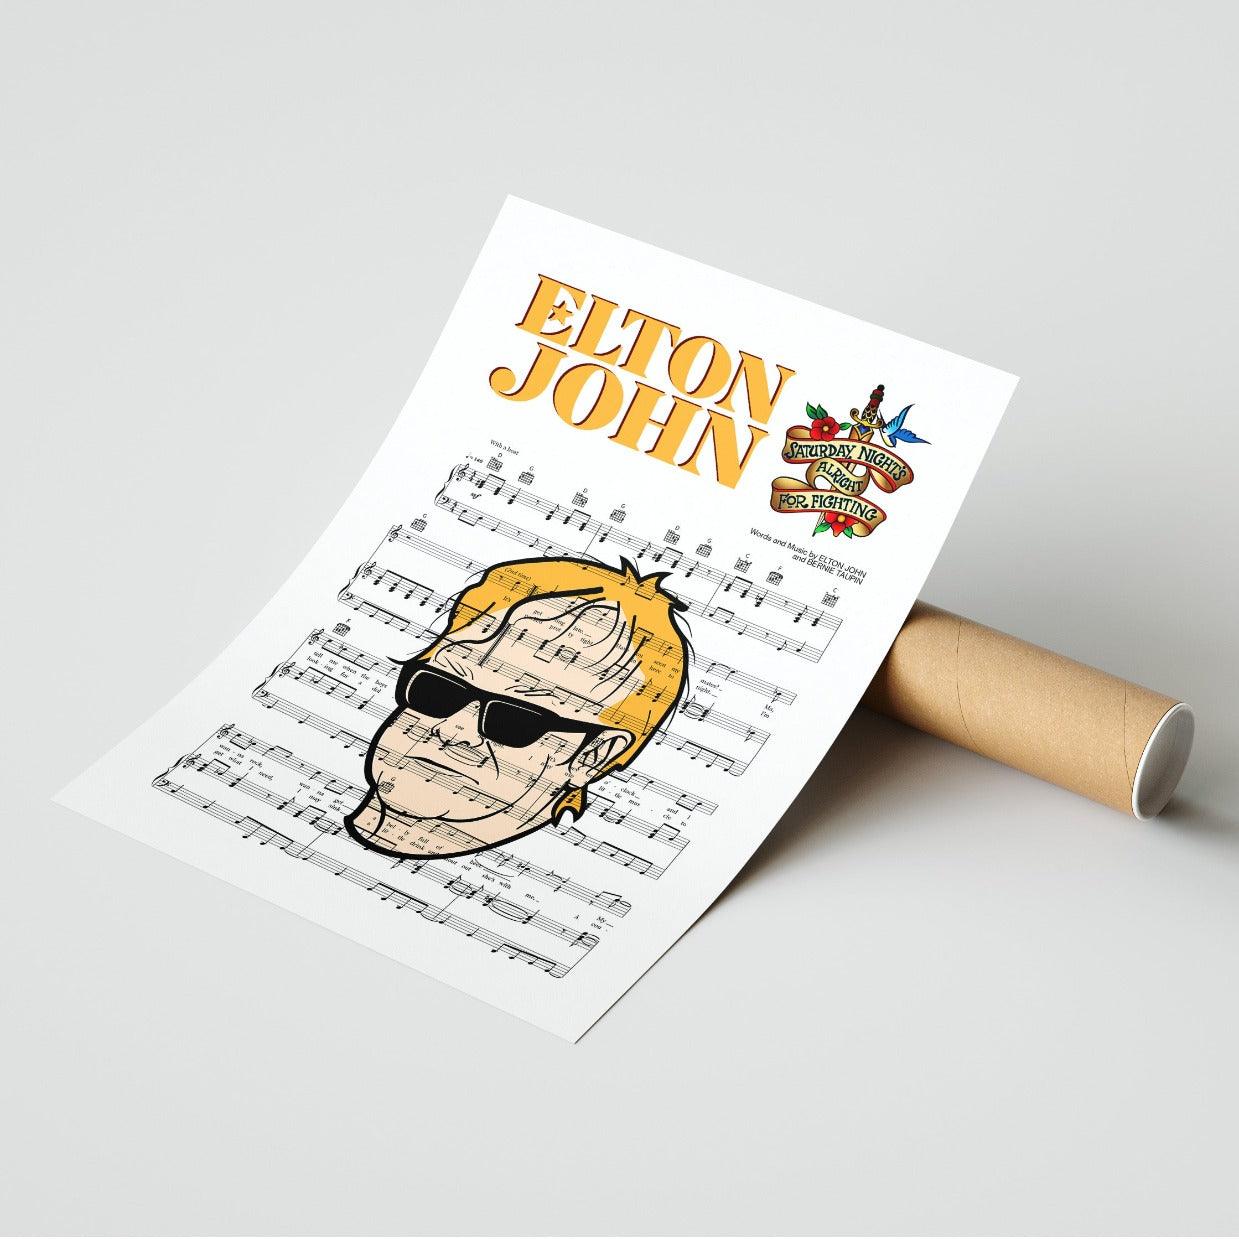 98Types Music brings you the very best in music prints. This iconic print by Elton John is a great addition to any music lover’s bedroom. The lyrics to his FIRST DANCE WEDDING SONG will look great on any wall. Add a touch of personality to your home decor with this unique and stylish print.